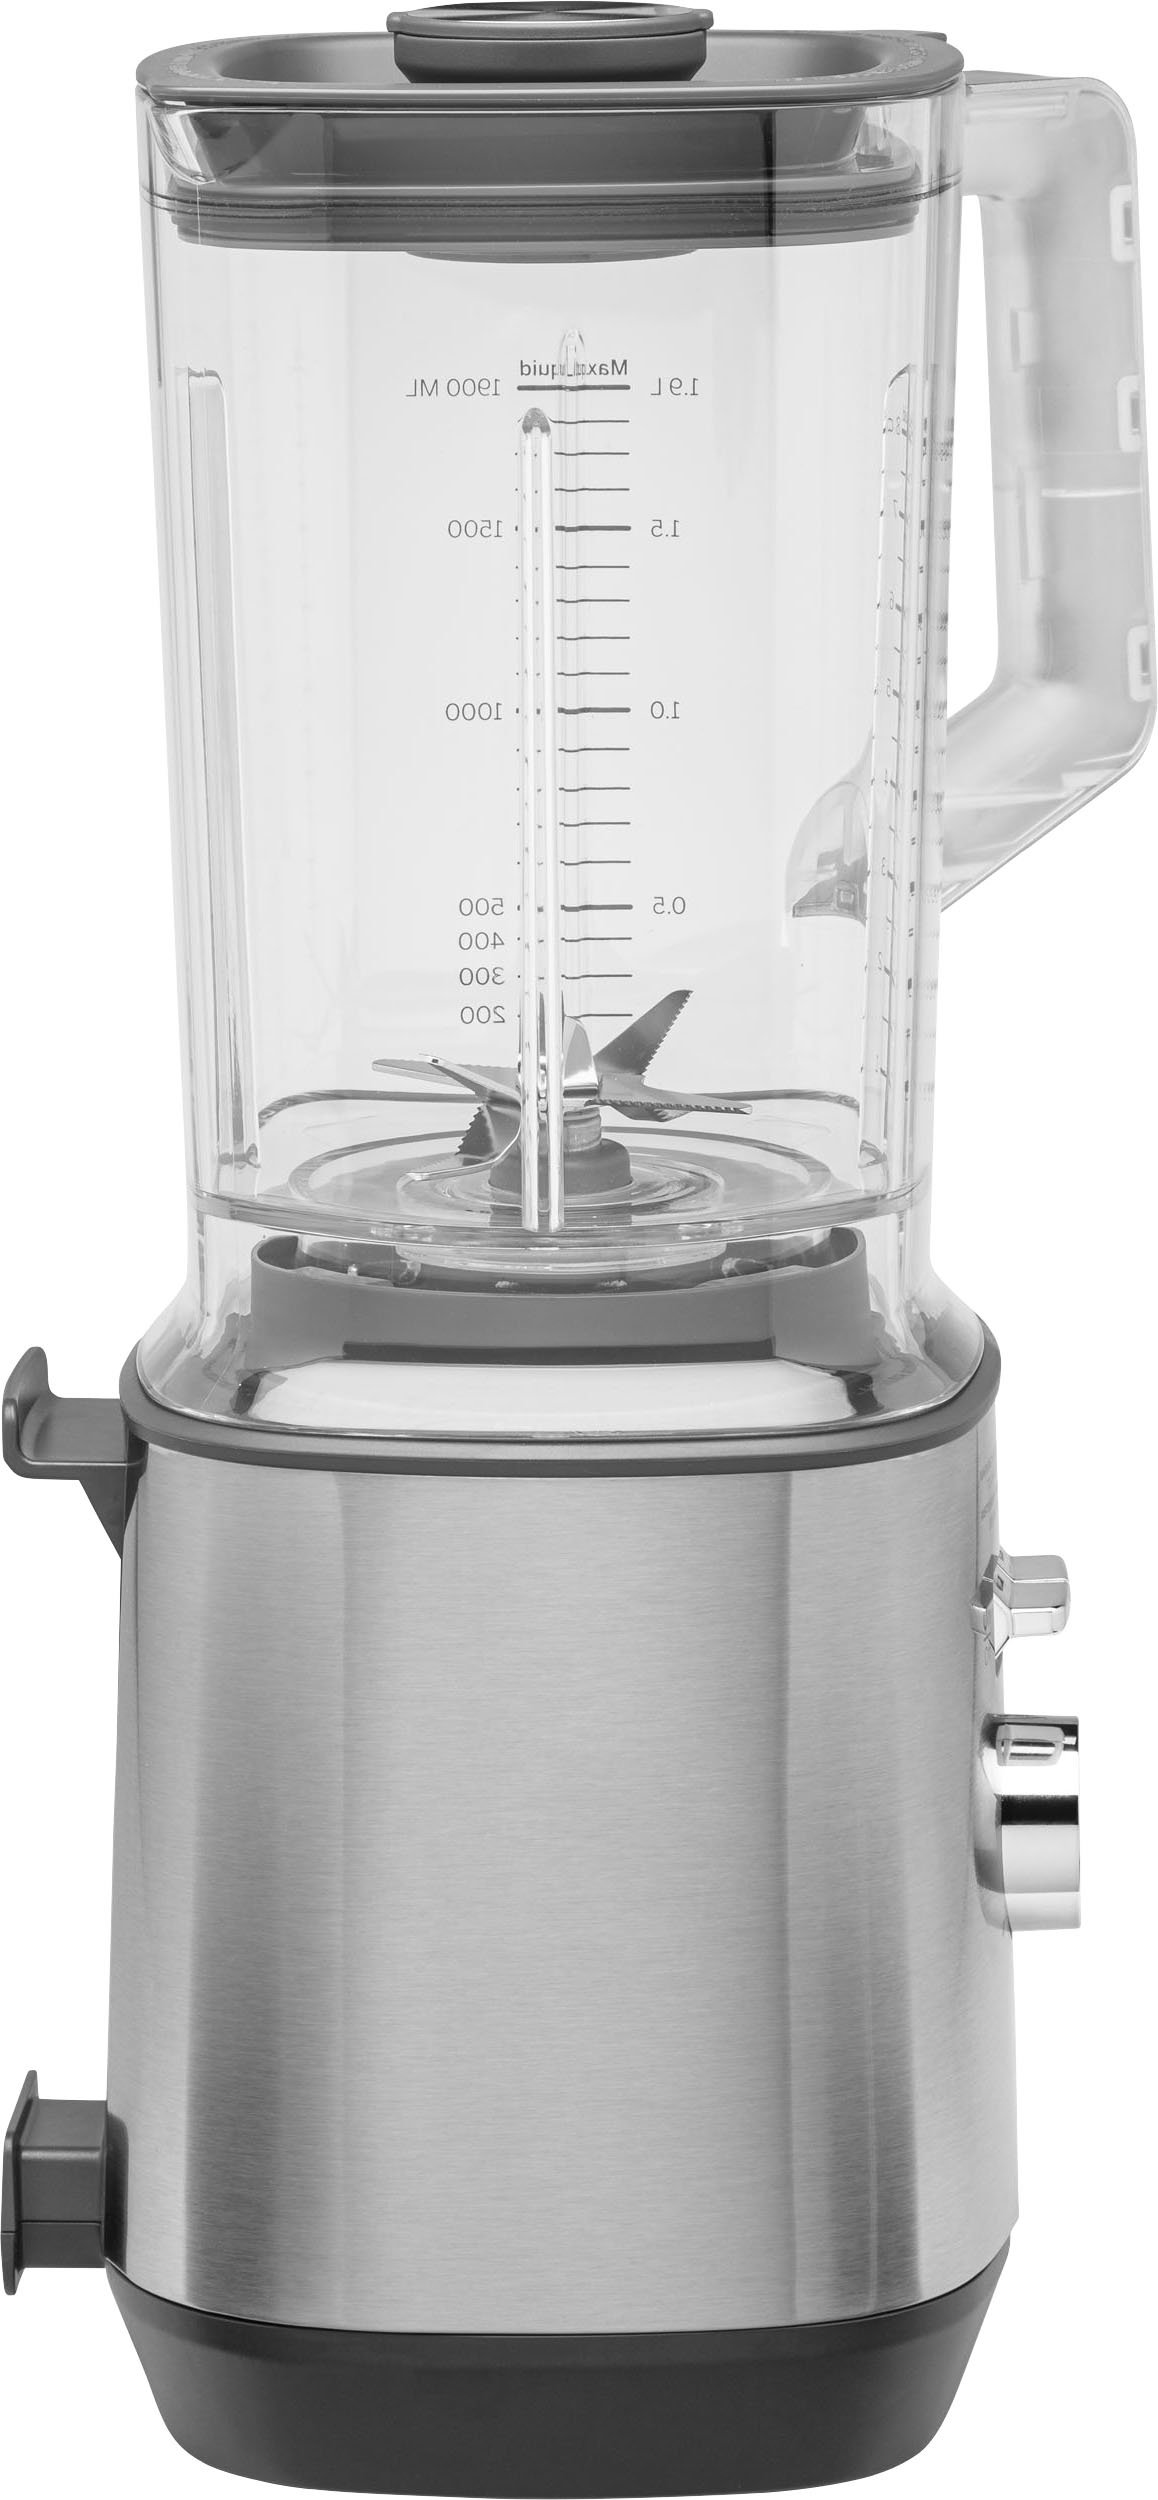 Angle View: GE - 5-Speed 64-Oz. Blender with Blender Cups - Stainless Steel